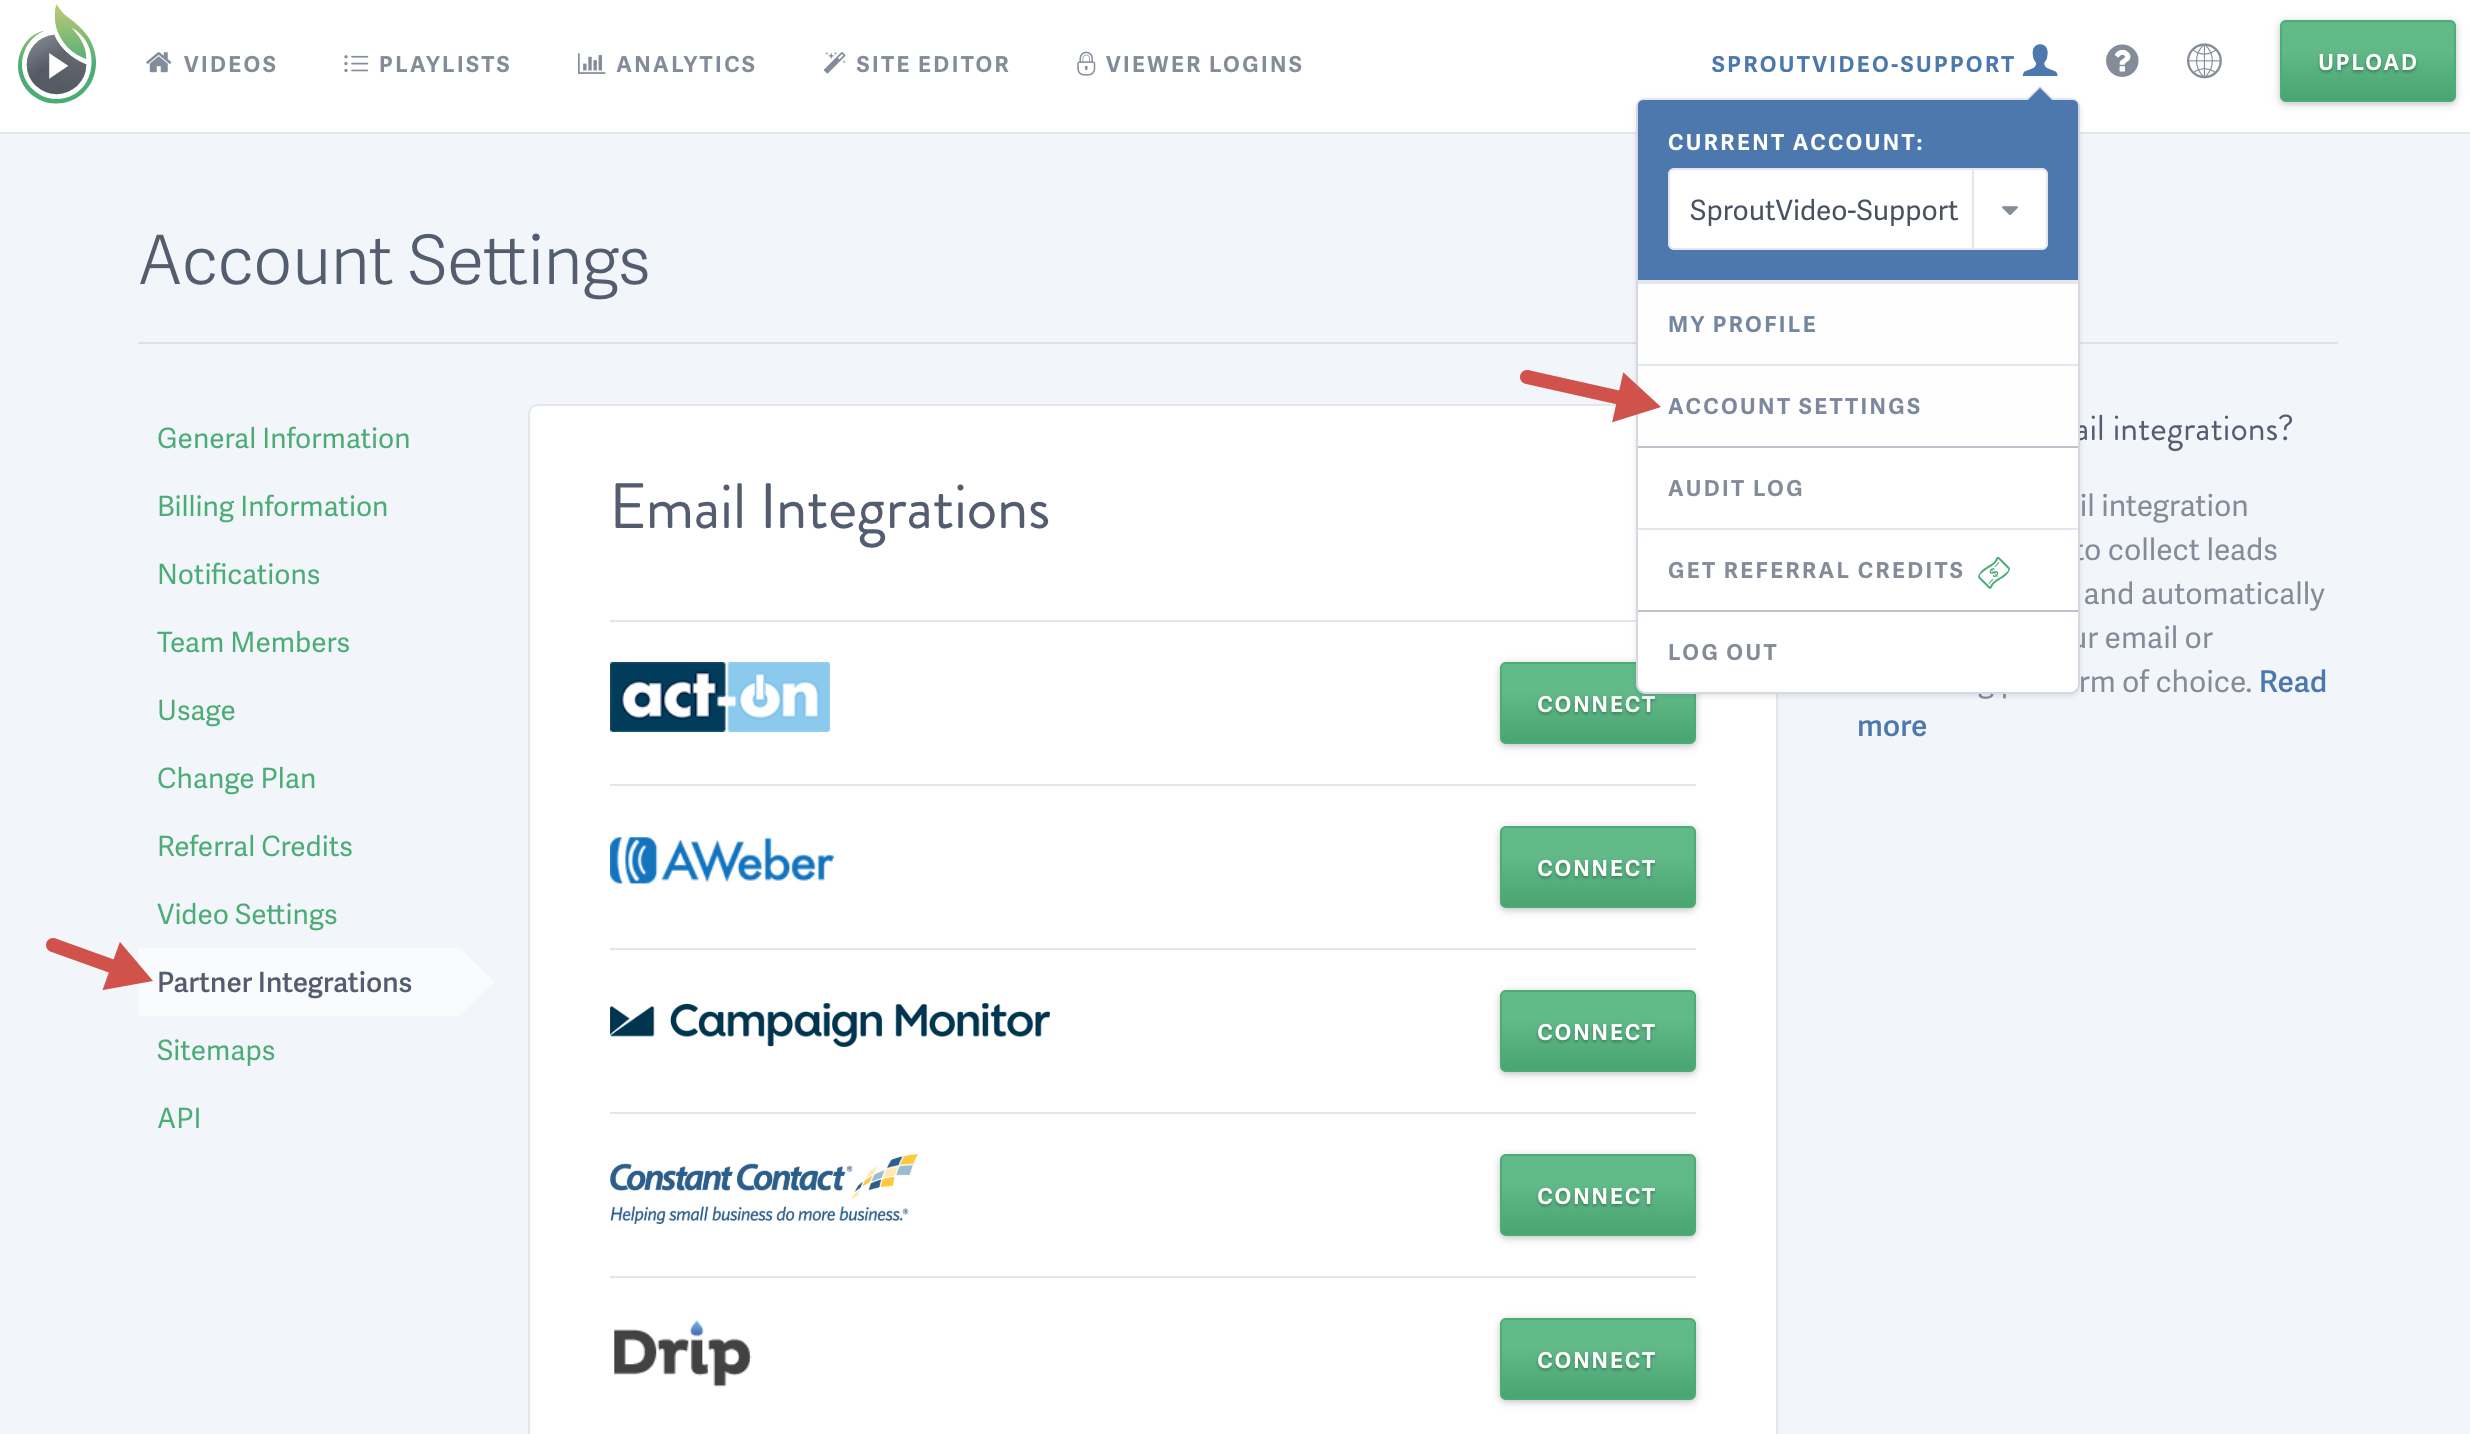 How to find Email integrations